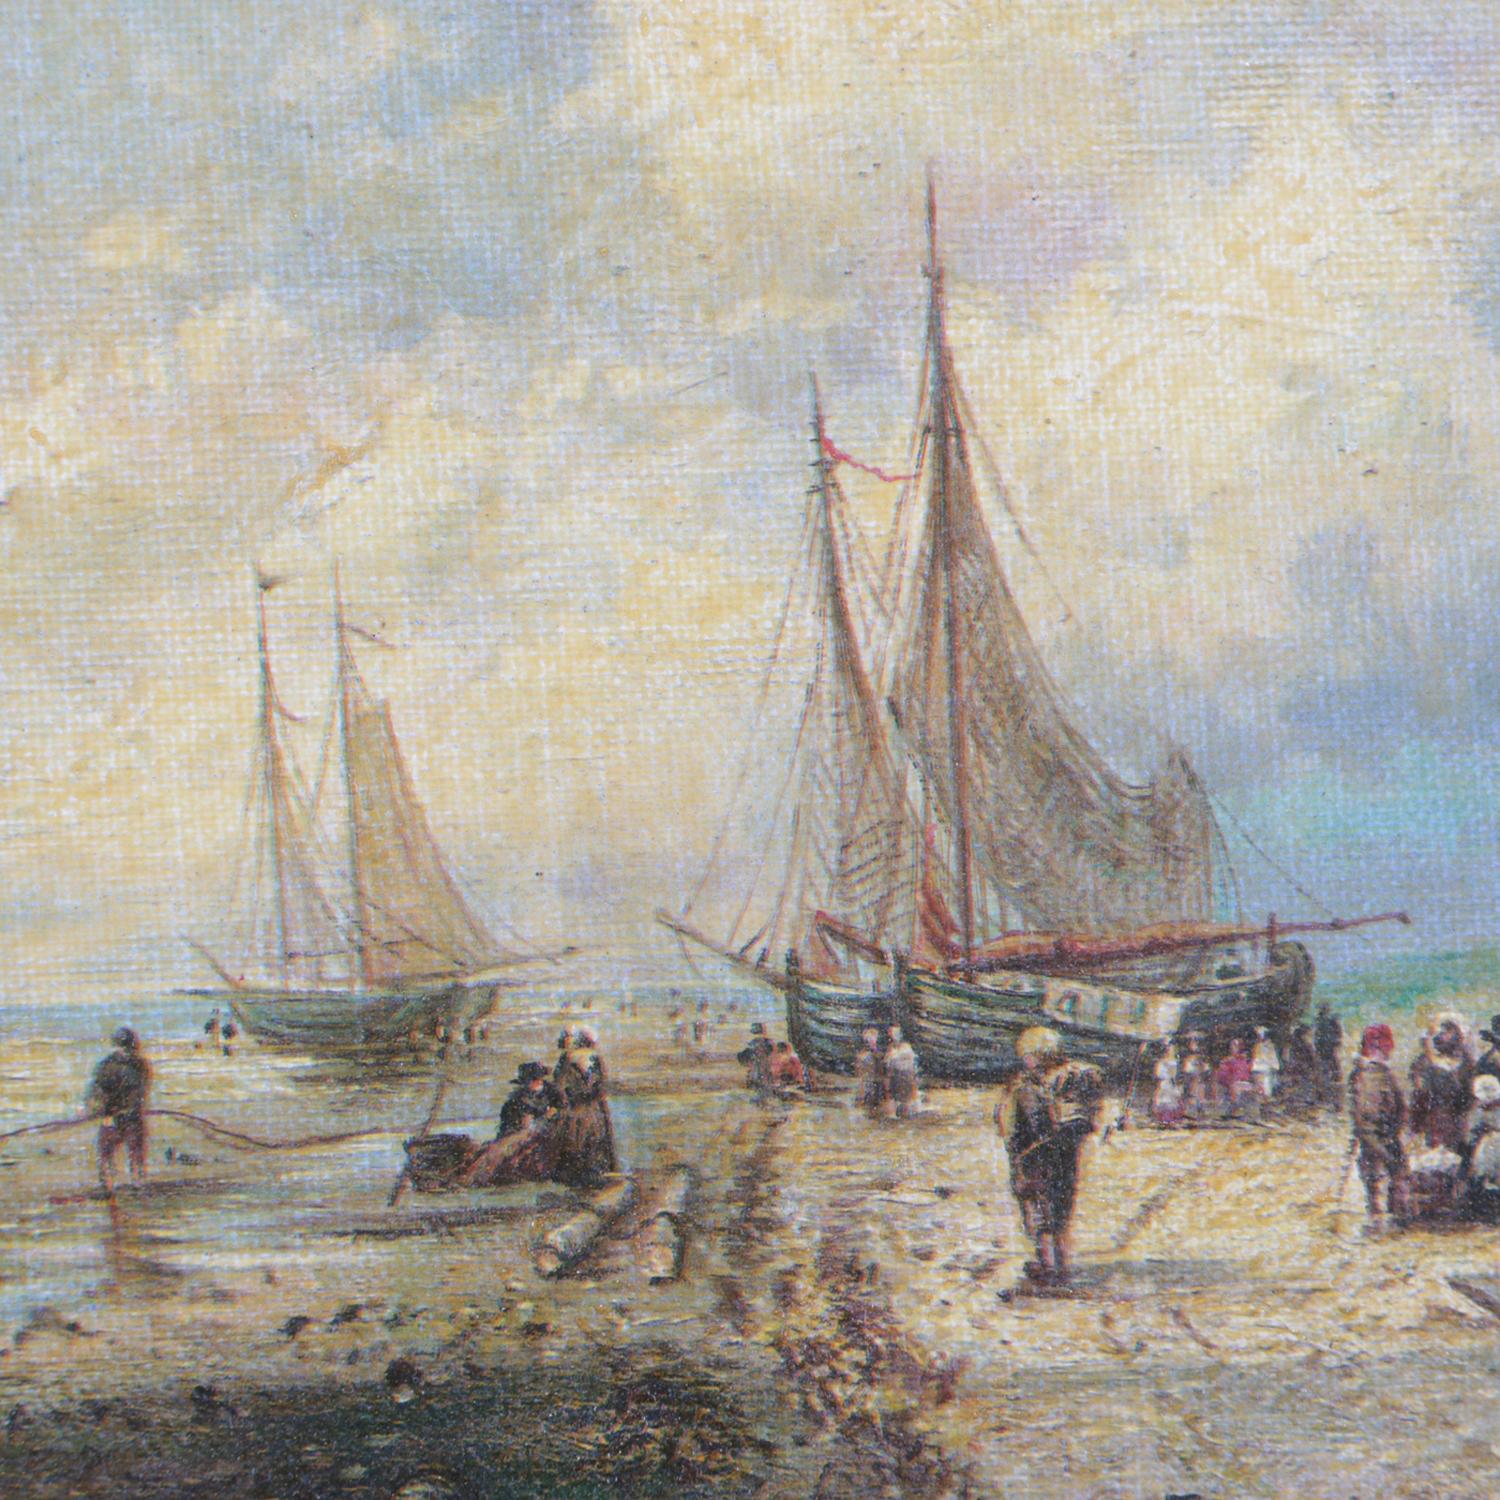 Framed English lithograph on canvas depicts harbor scene with boats and figures on shore with fishing nets after C. Leickert by Higgins and Bowers, seated in giltwood frame, english maritime print of c leickert in gilt wood frame, en verso stamped